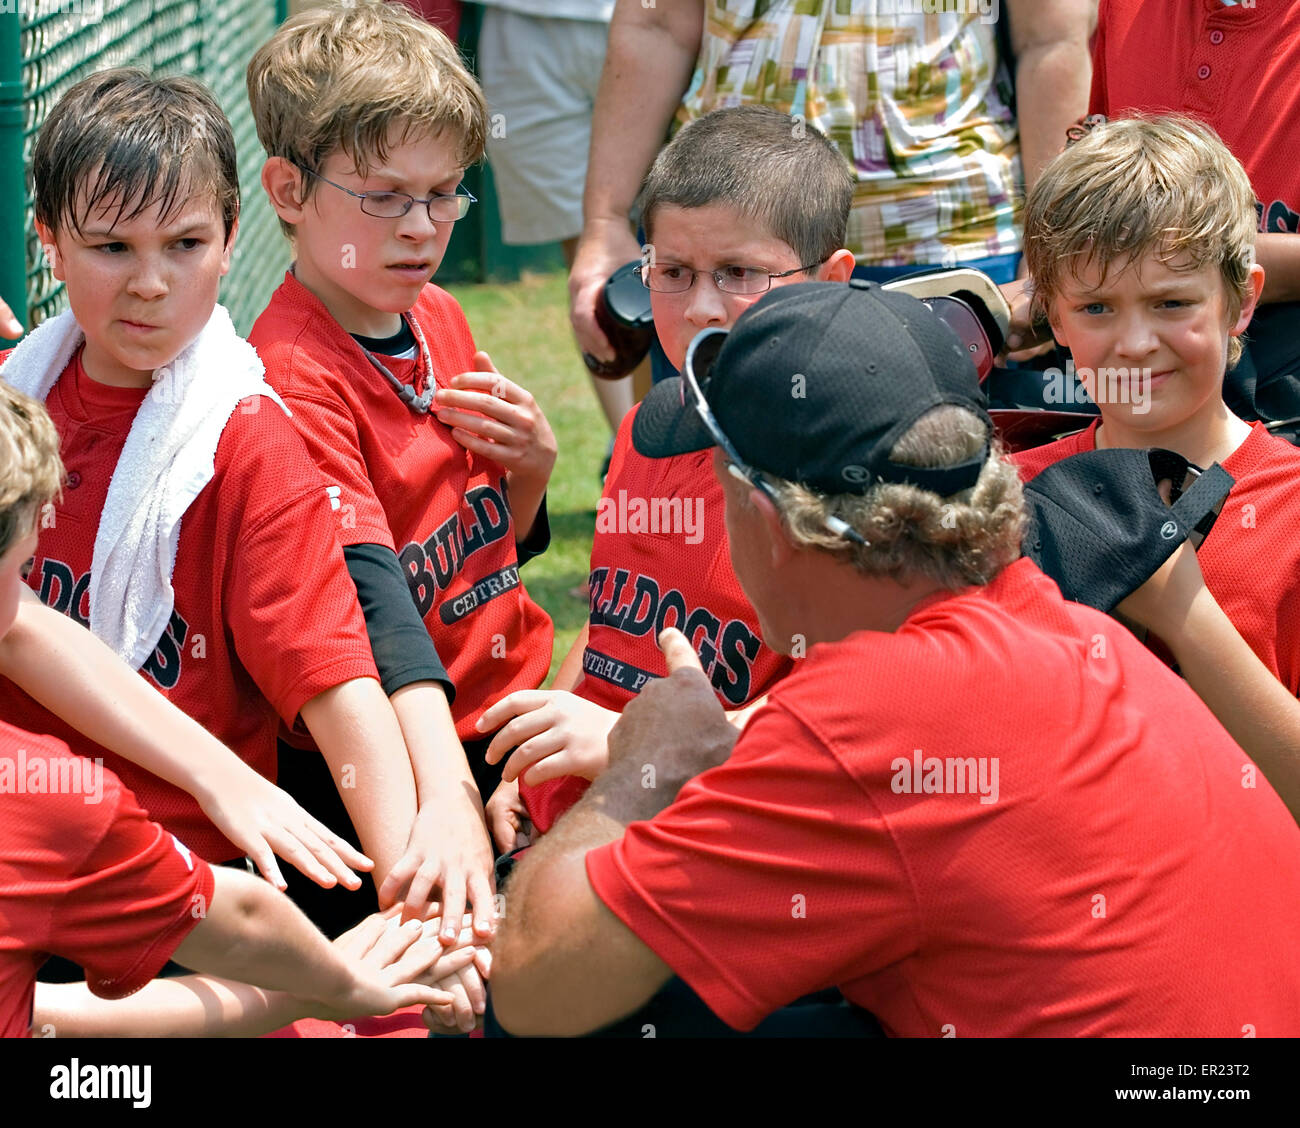 A coach giving a pep talk to his baseball team of 10-11 year old boys before the game begins, Stock Photo